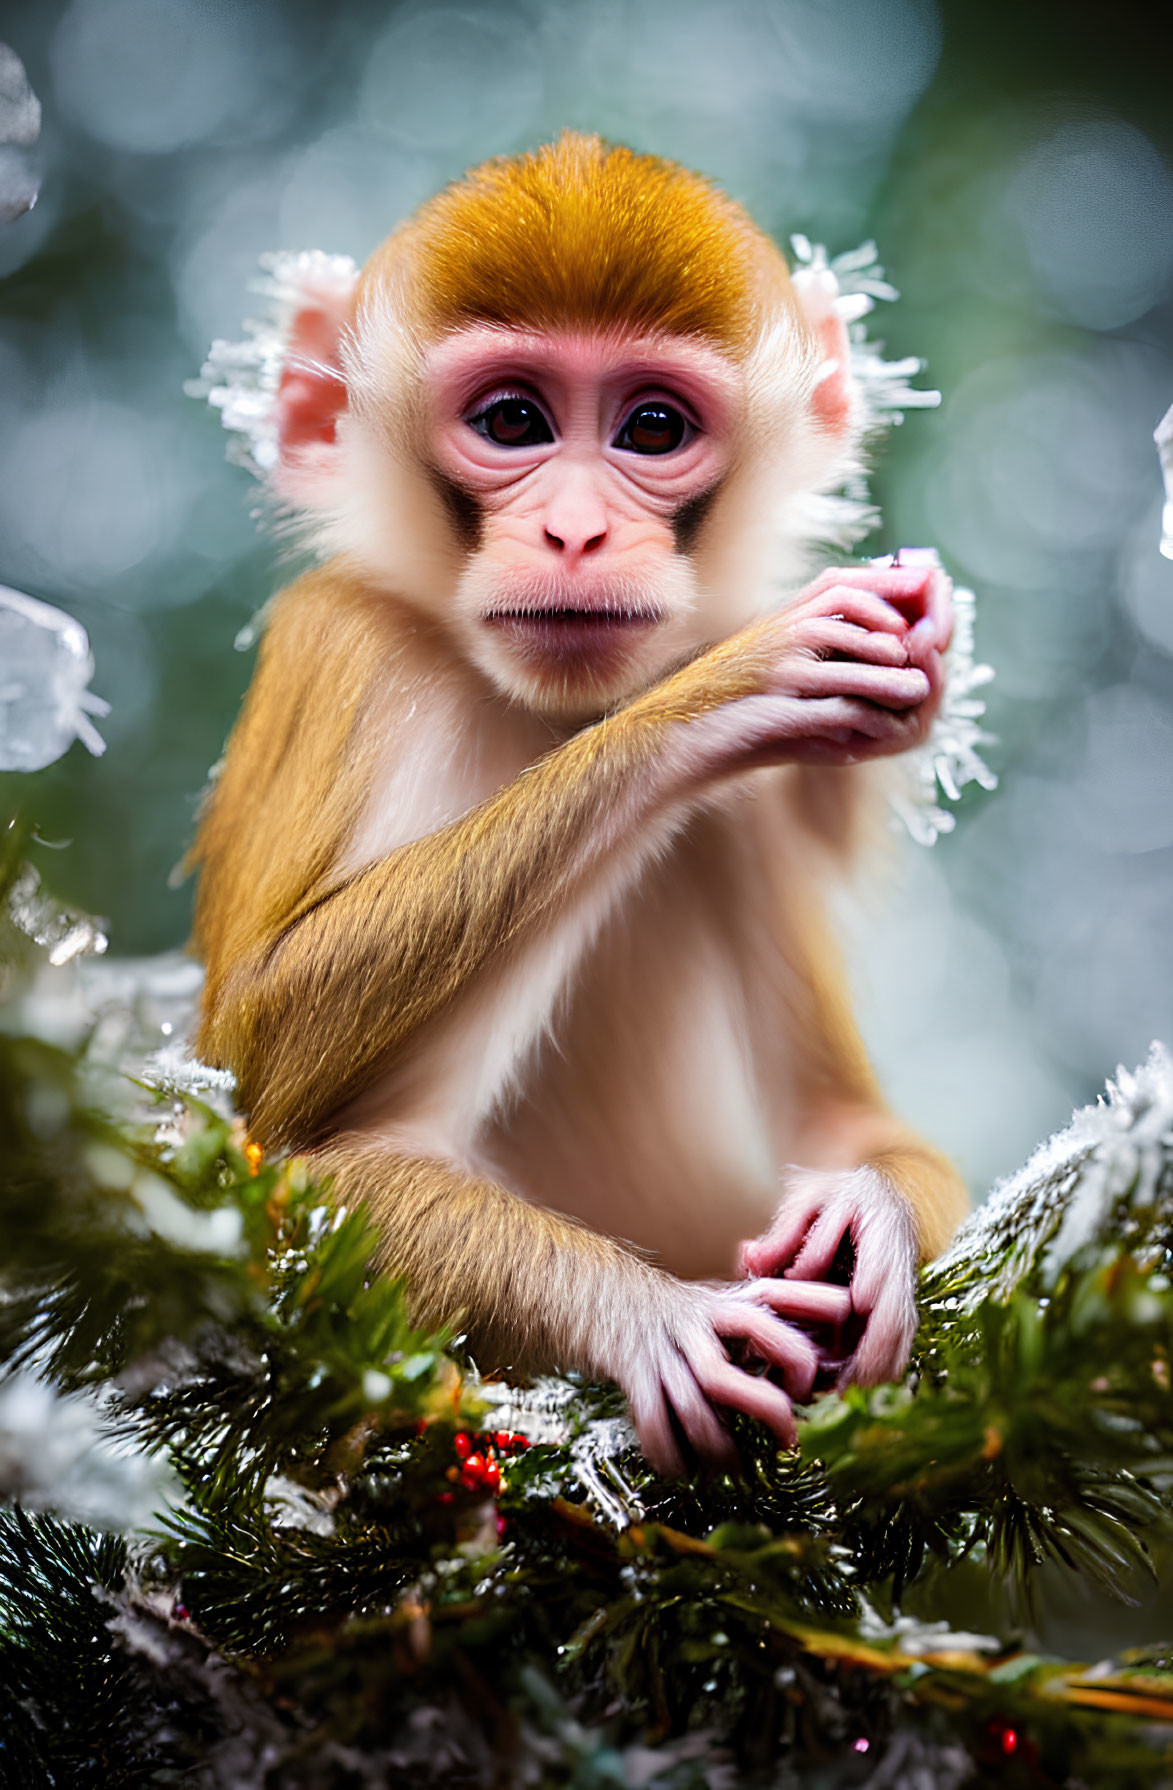 Young monkey with pensive expression in frost-covered greenery